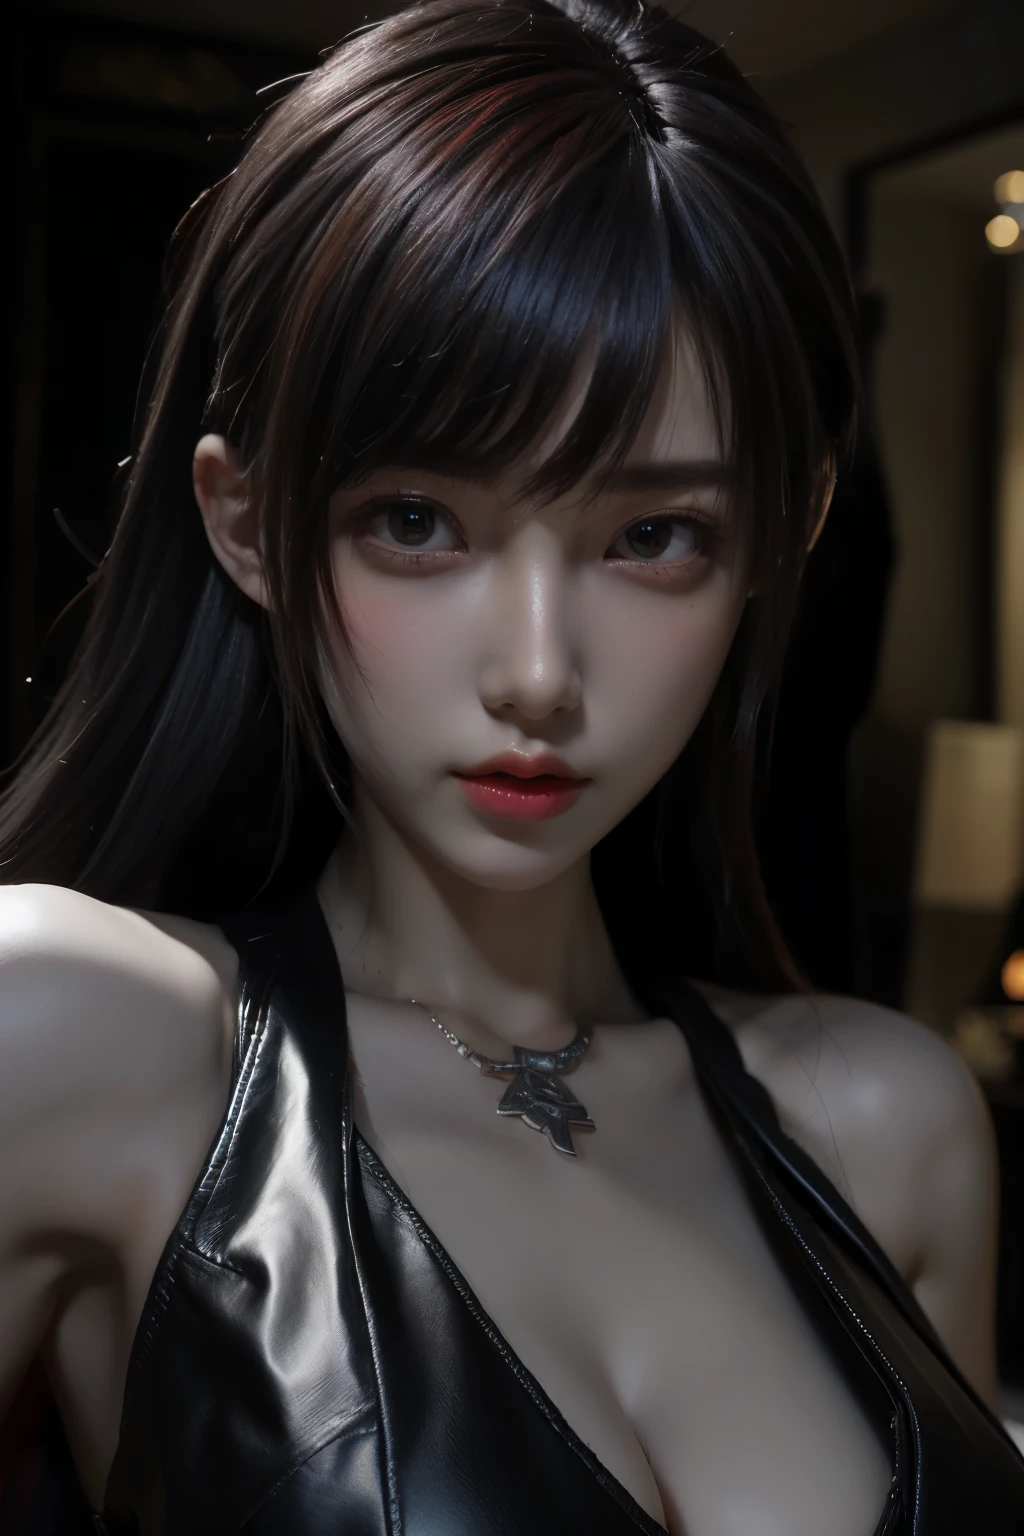 Masterpiece,Game art,The best picture quality,Highest resolution,8K,(Portrait),Unreal Engine 5 rendering works,(Digital Photography),((Portrait Feature:1.5)),
20 year old girl,Short hair details,With long bangs,(The red eye makeup is very meticulous),(With long gray hair:1.4),(Large, full breasts),Elegant and noble,Brave and charming,
(Future armor combined with the characteristics of ancient Chinese armor,Hollow design,Power Armor,The mysterious Eastern runes,A delicate dress pattern,A flash of magic),Warrior of the future,Cyberpunk figures,Background of war,
Movie lights，Ray tracing，Game CG，((3D Unreal Engine))，OC rendering reflection pattern